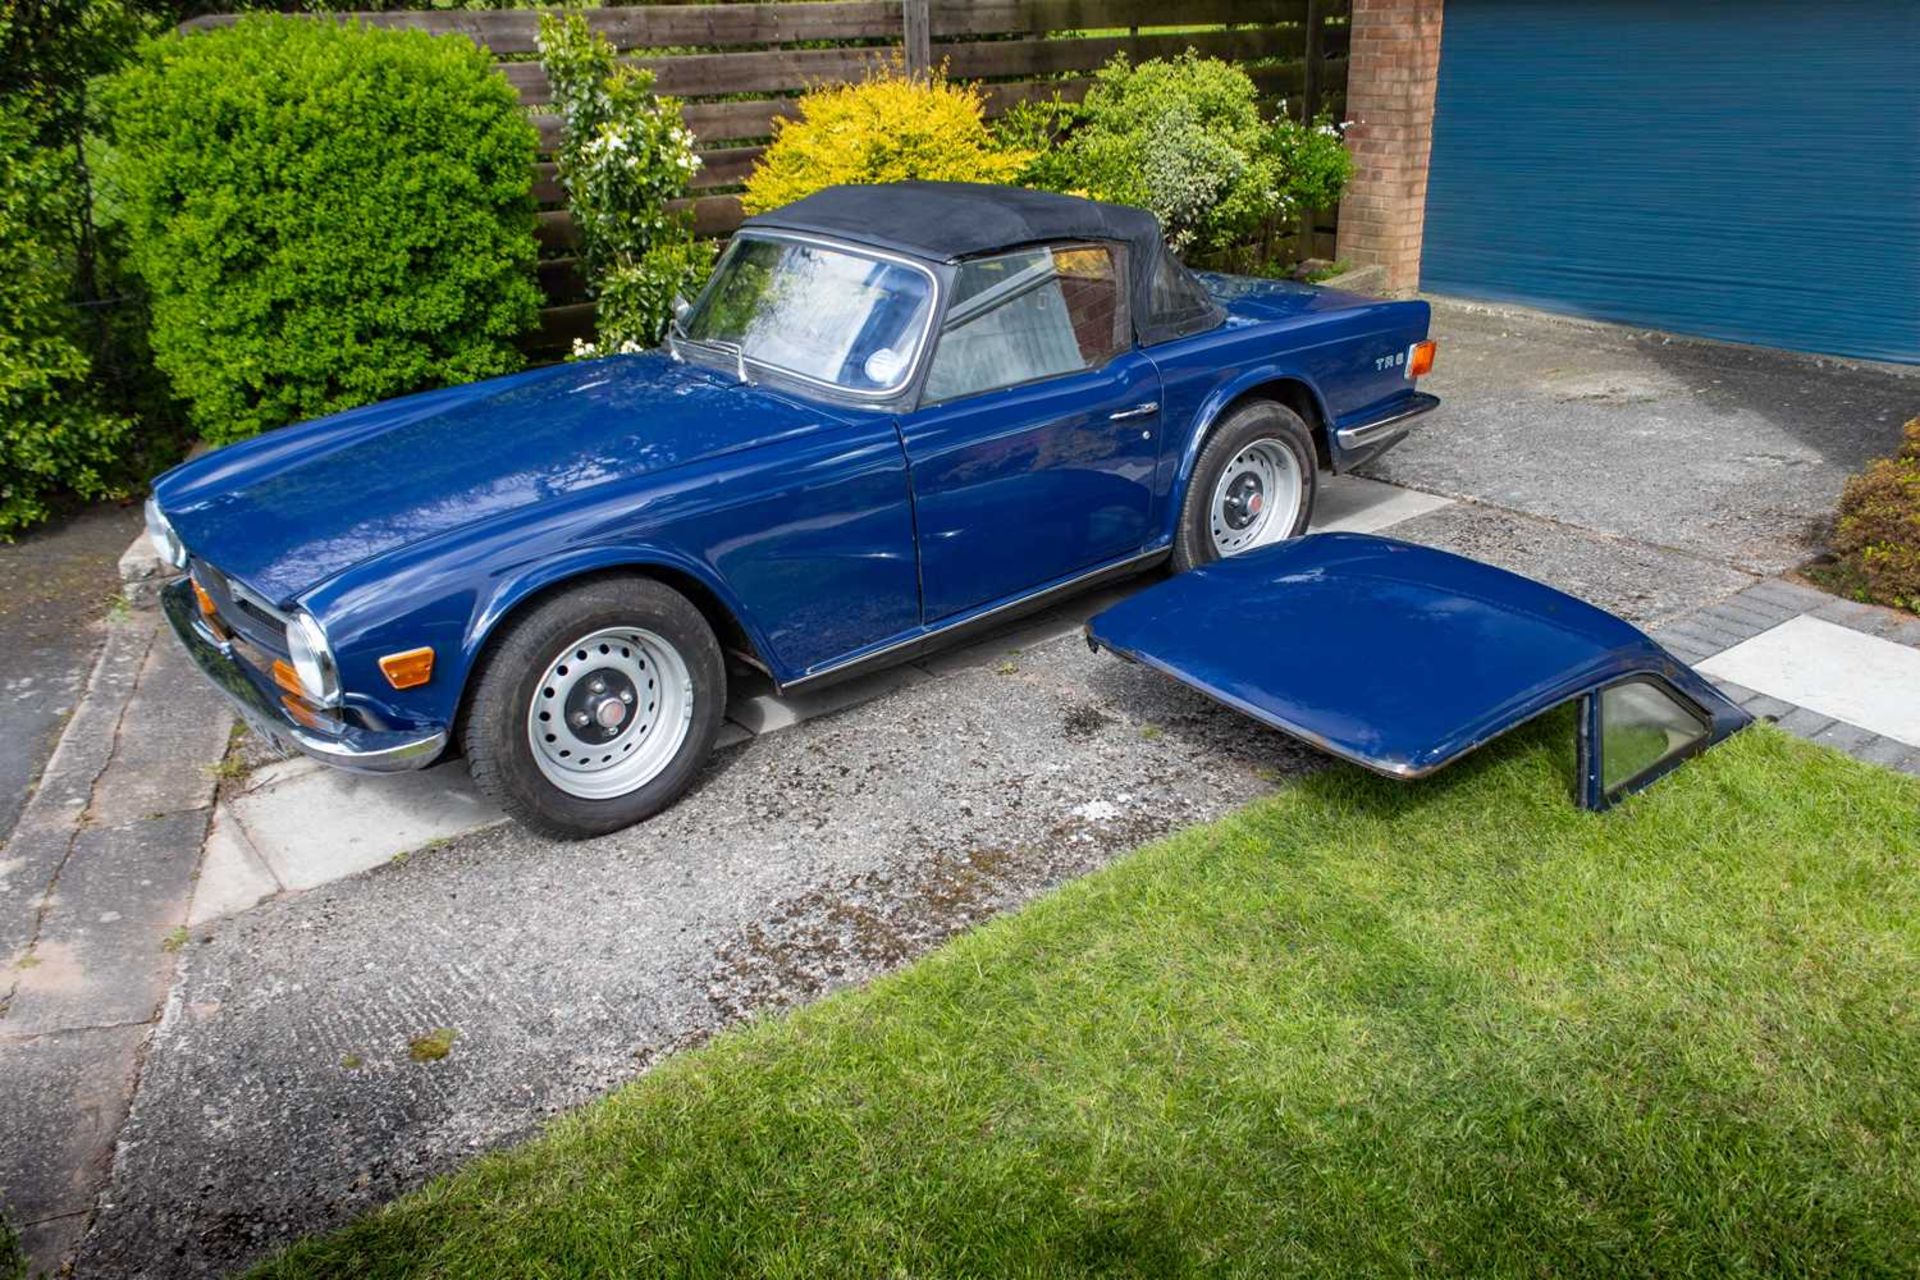 1972 Triumph TR6 Home market example, specified with manual overdrive transmission - Image 24 of 95